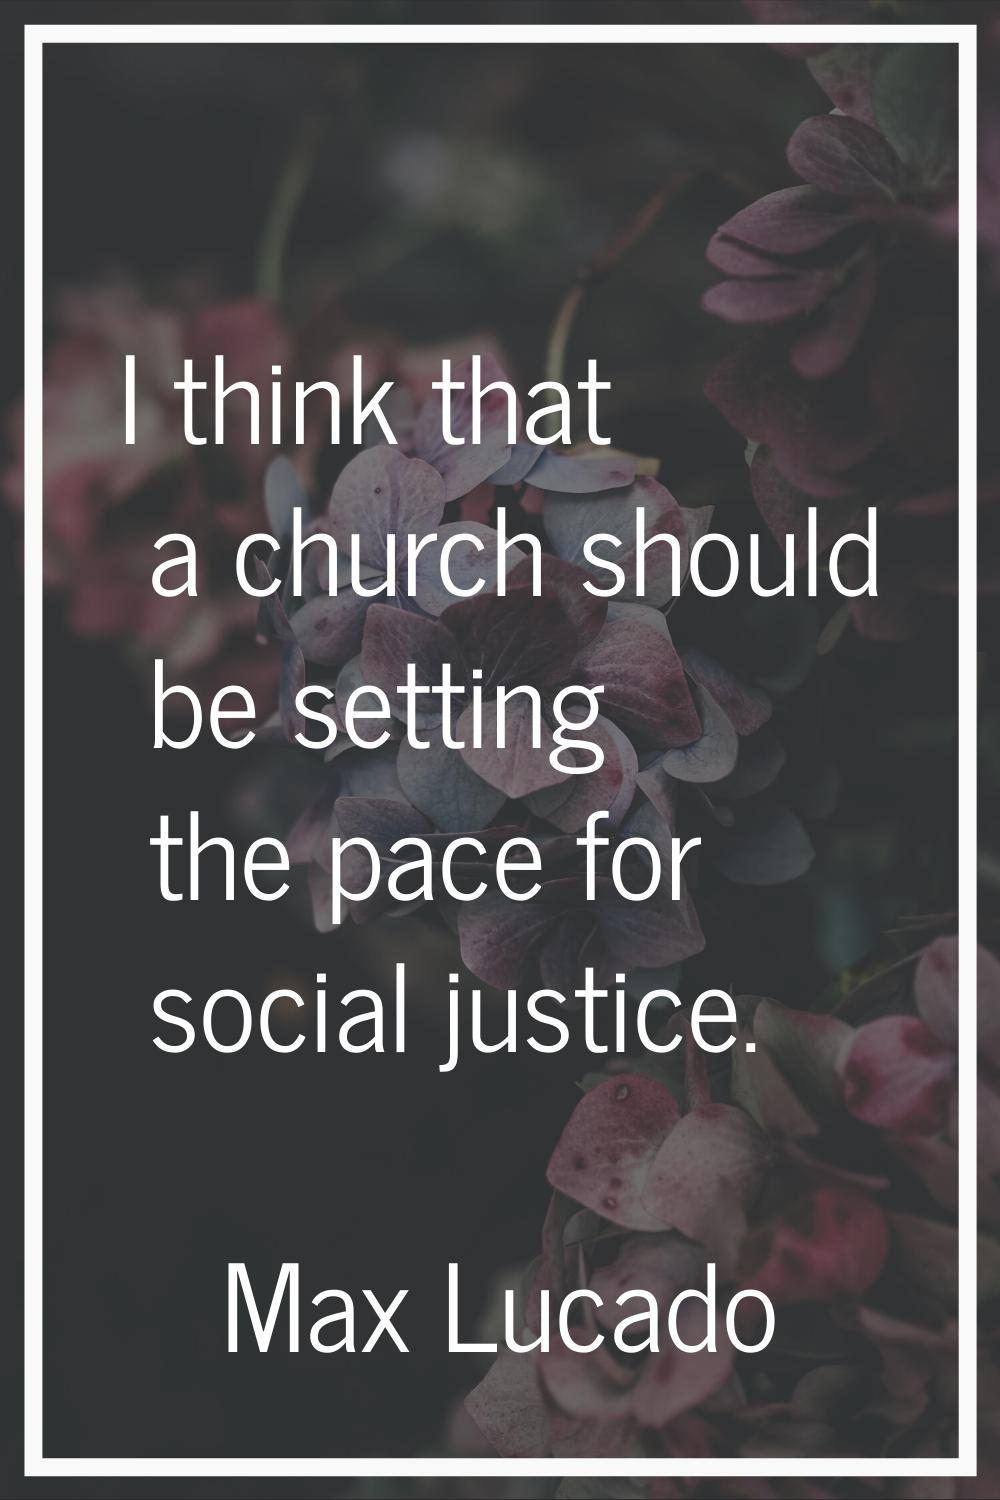 I think that a church should be setting the pace for social justice.